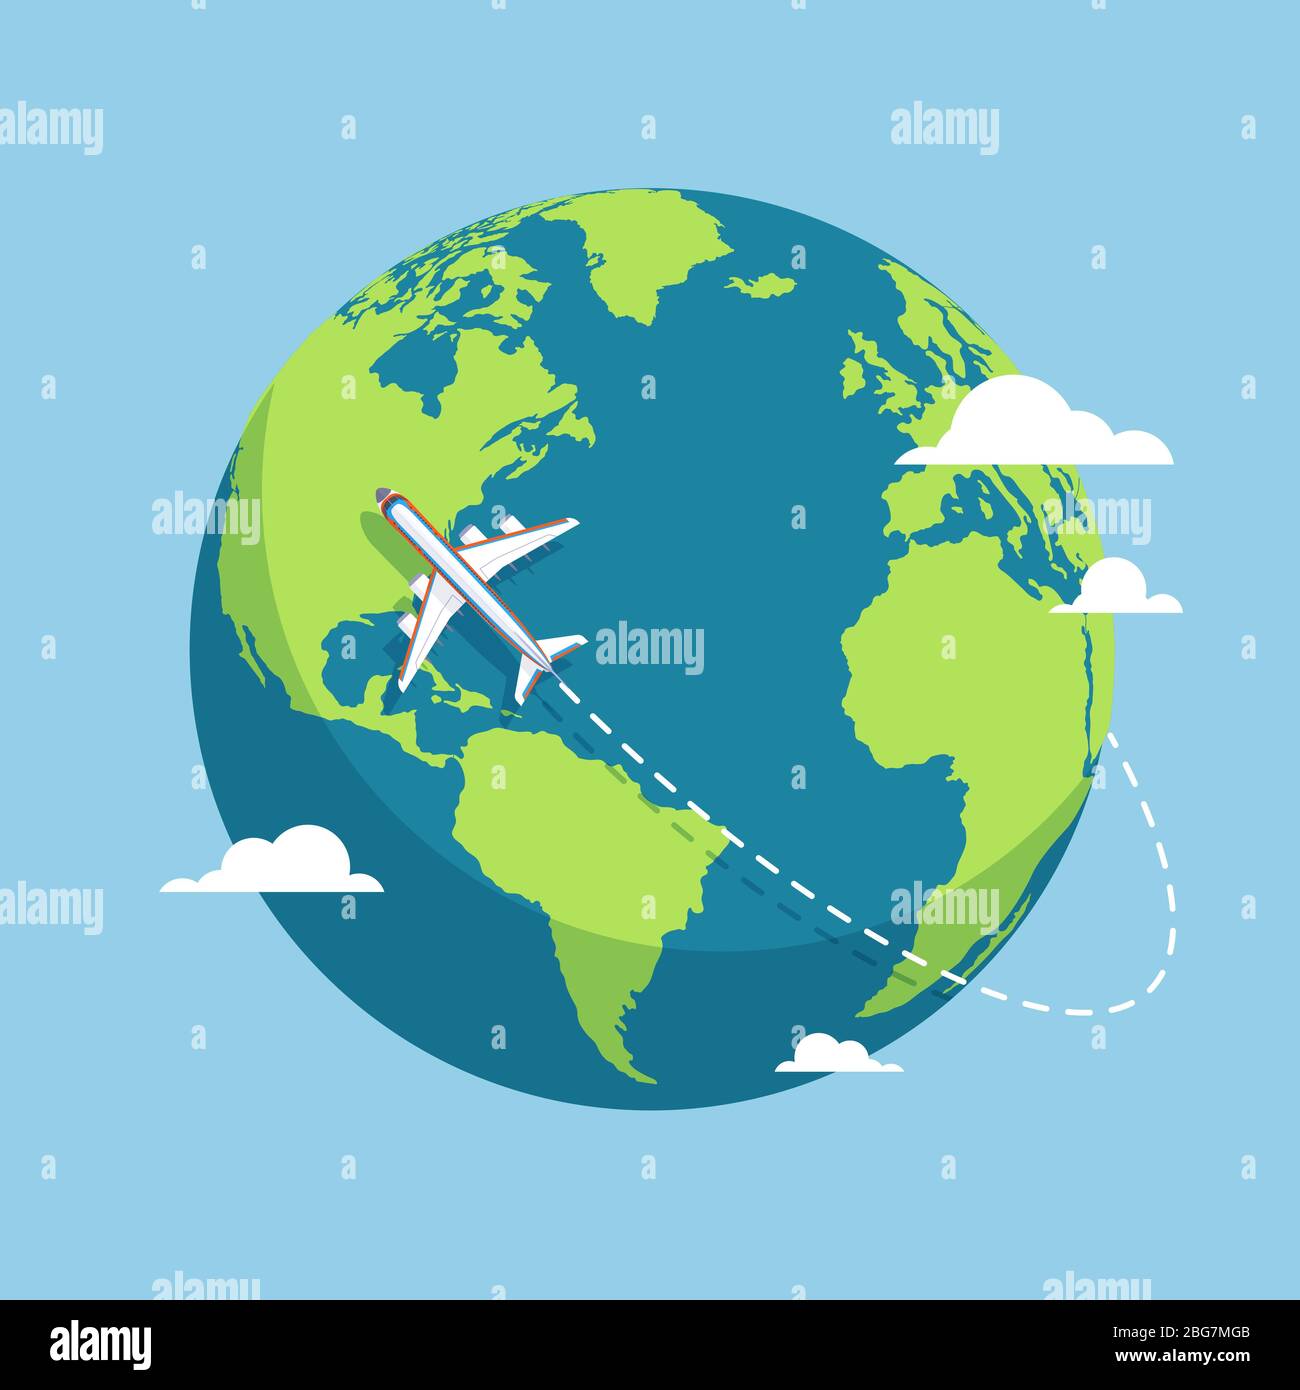 Plane and globe. Aircraft flying around Earth planet with continents and oceans. Flat vector illustration. Flight plane, world travel air Stock Vector